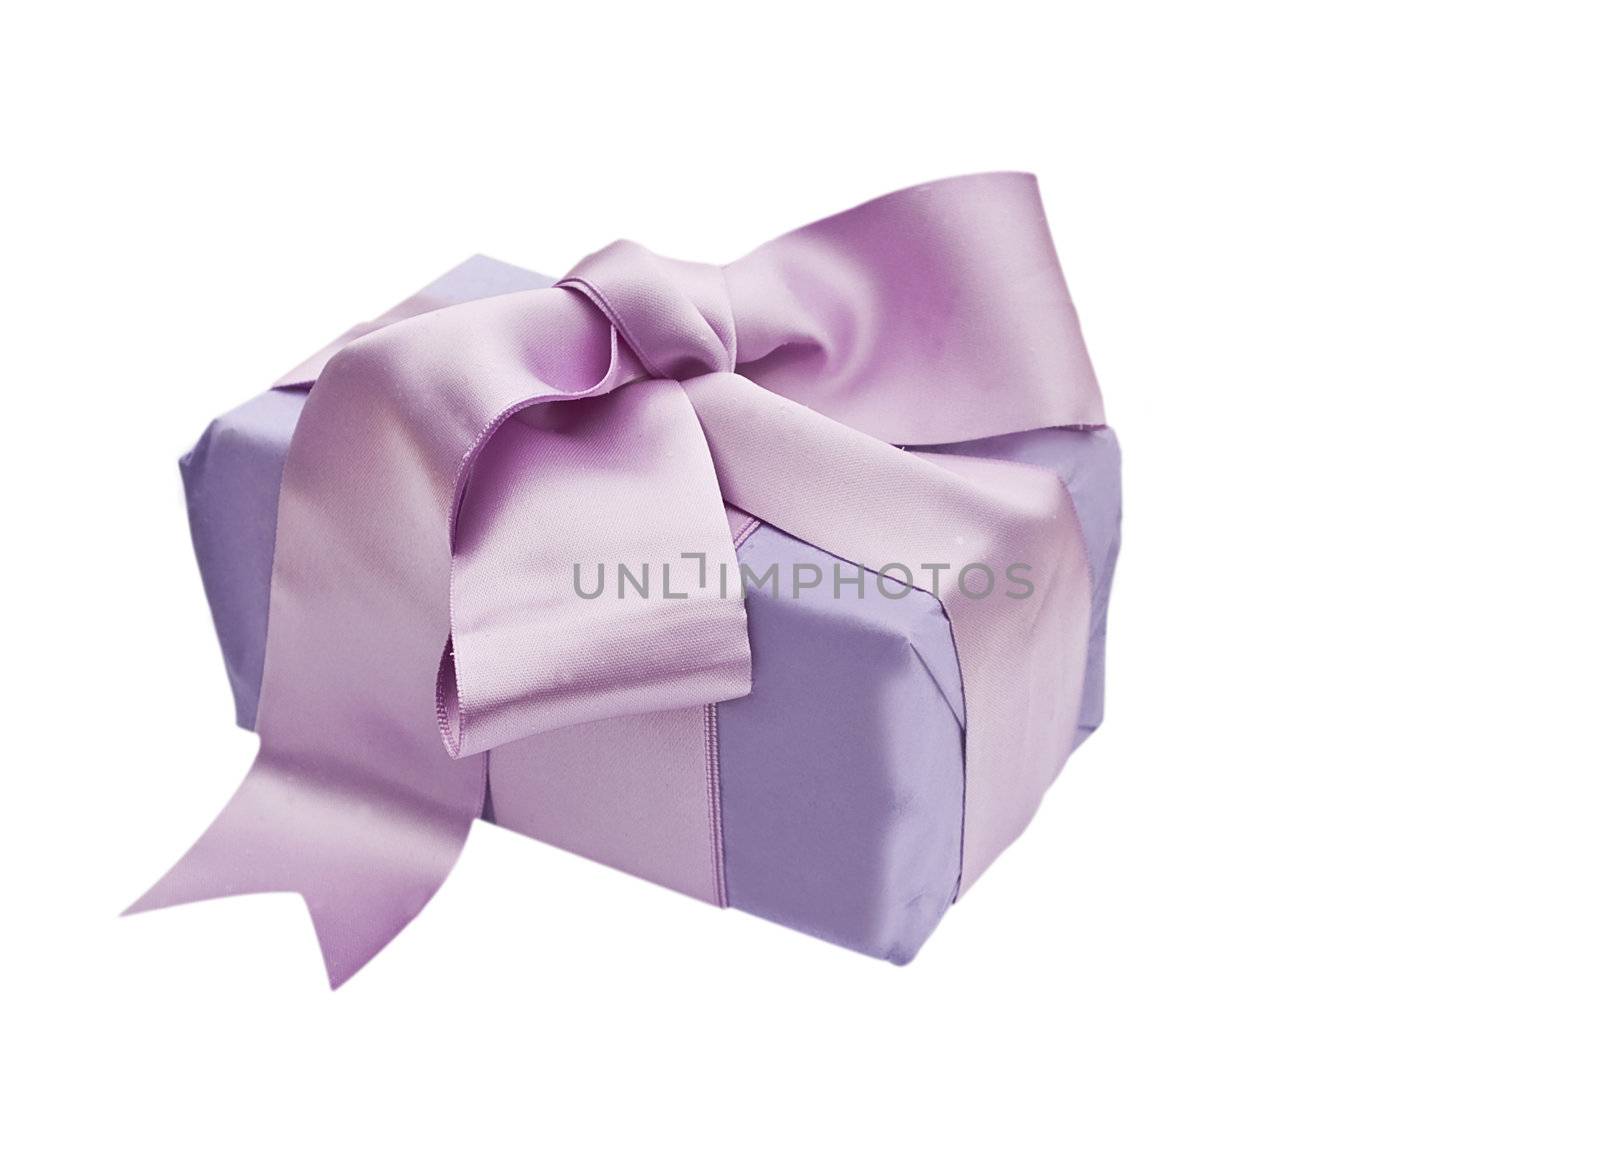 Gift box wrapped with wrapping tissue and a satin bow isolated on a white background

